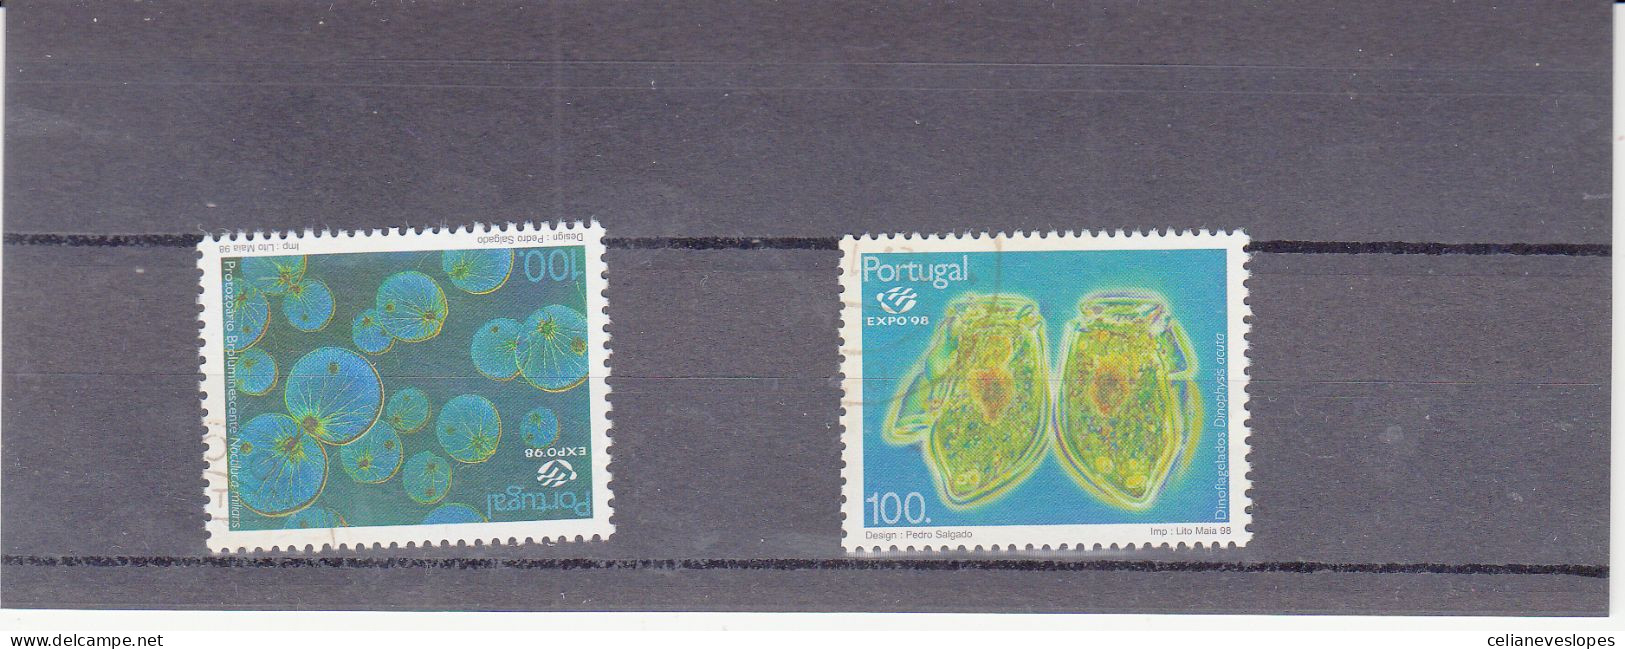 Portugal, EXPO 98, 1998, Mundifil Nº 2479 A 2480 Used - Used Stamps